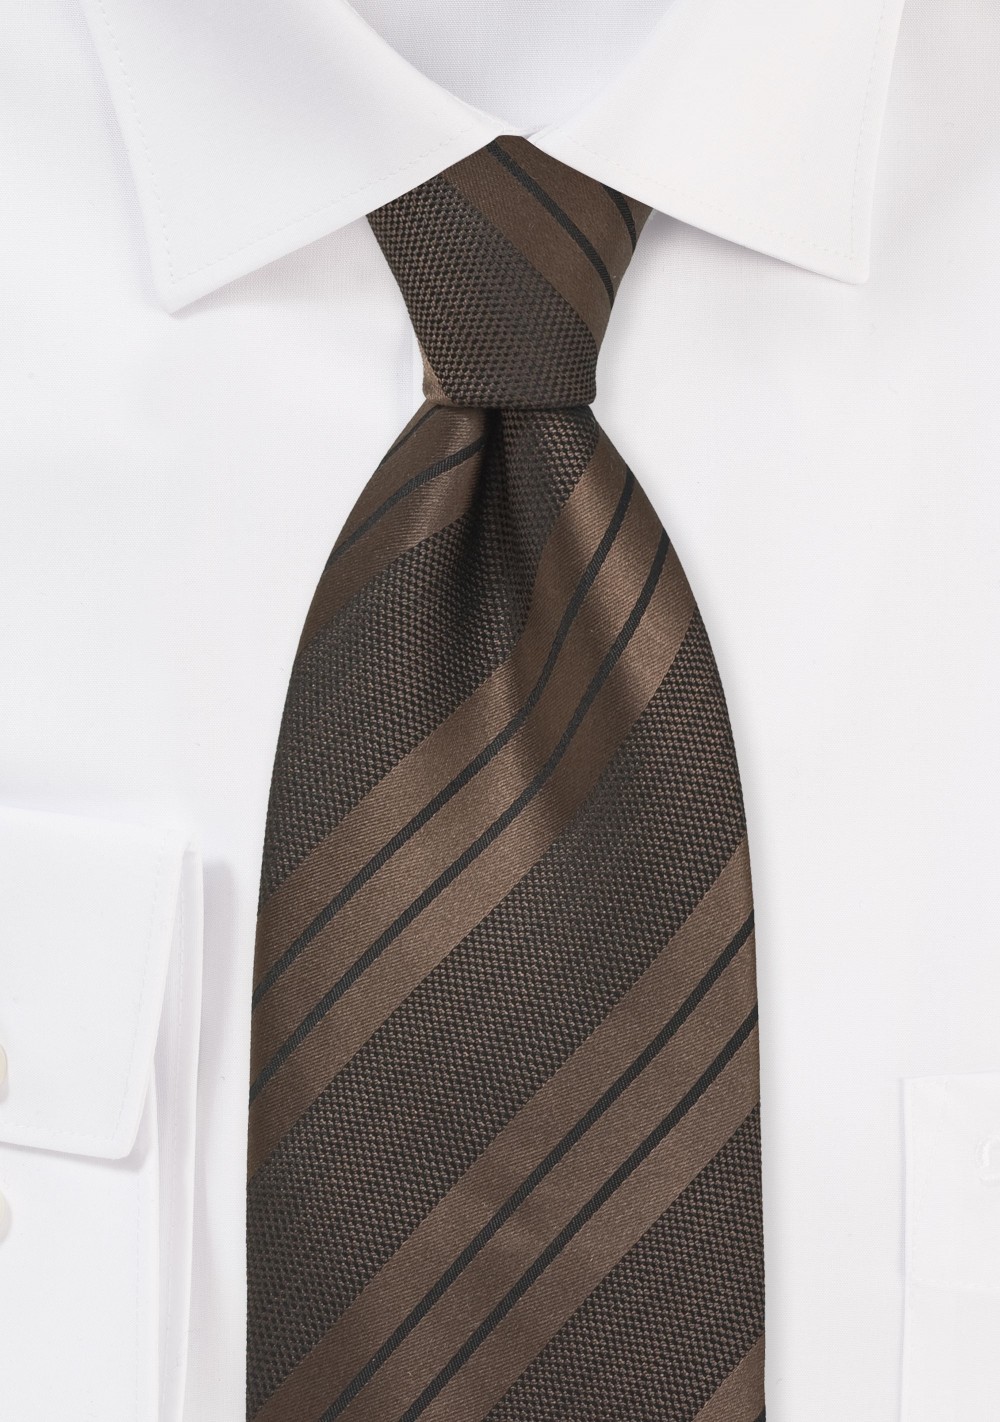 Brown and Black Striped Tie